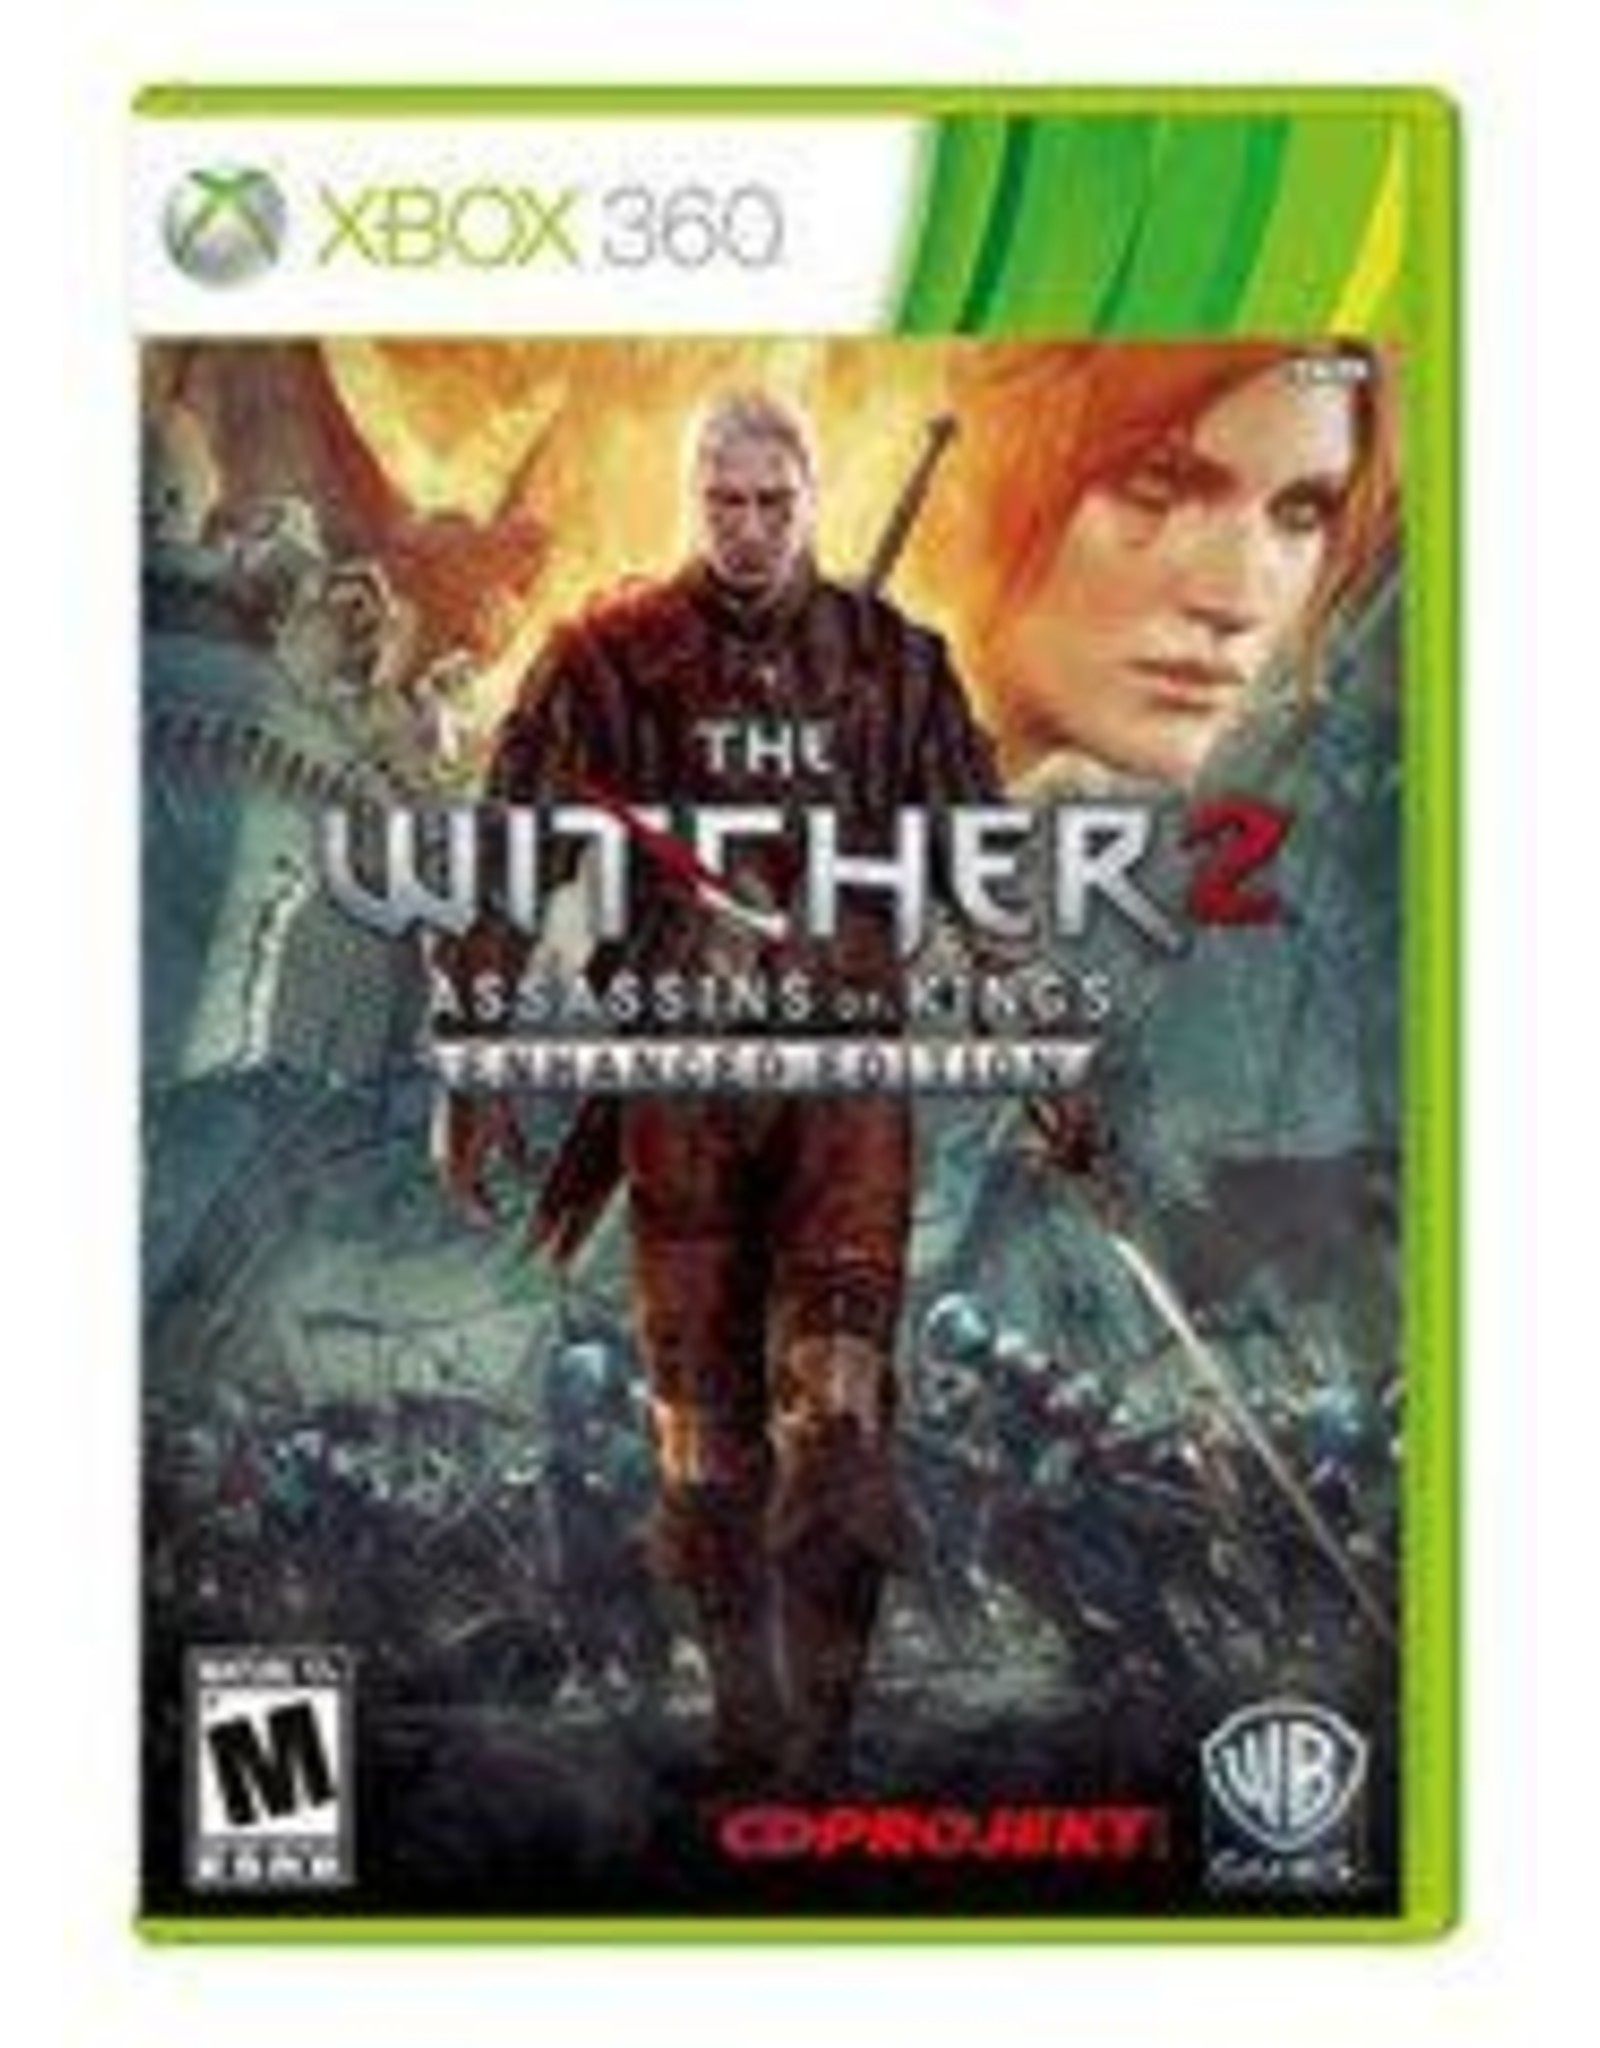 Xbox 360 Witcher 2: Assassins of Kings Enhanced Edition (Used)